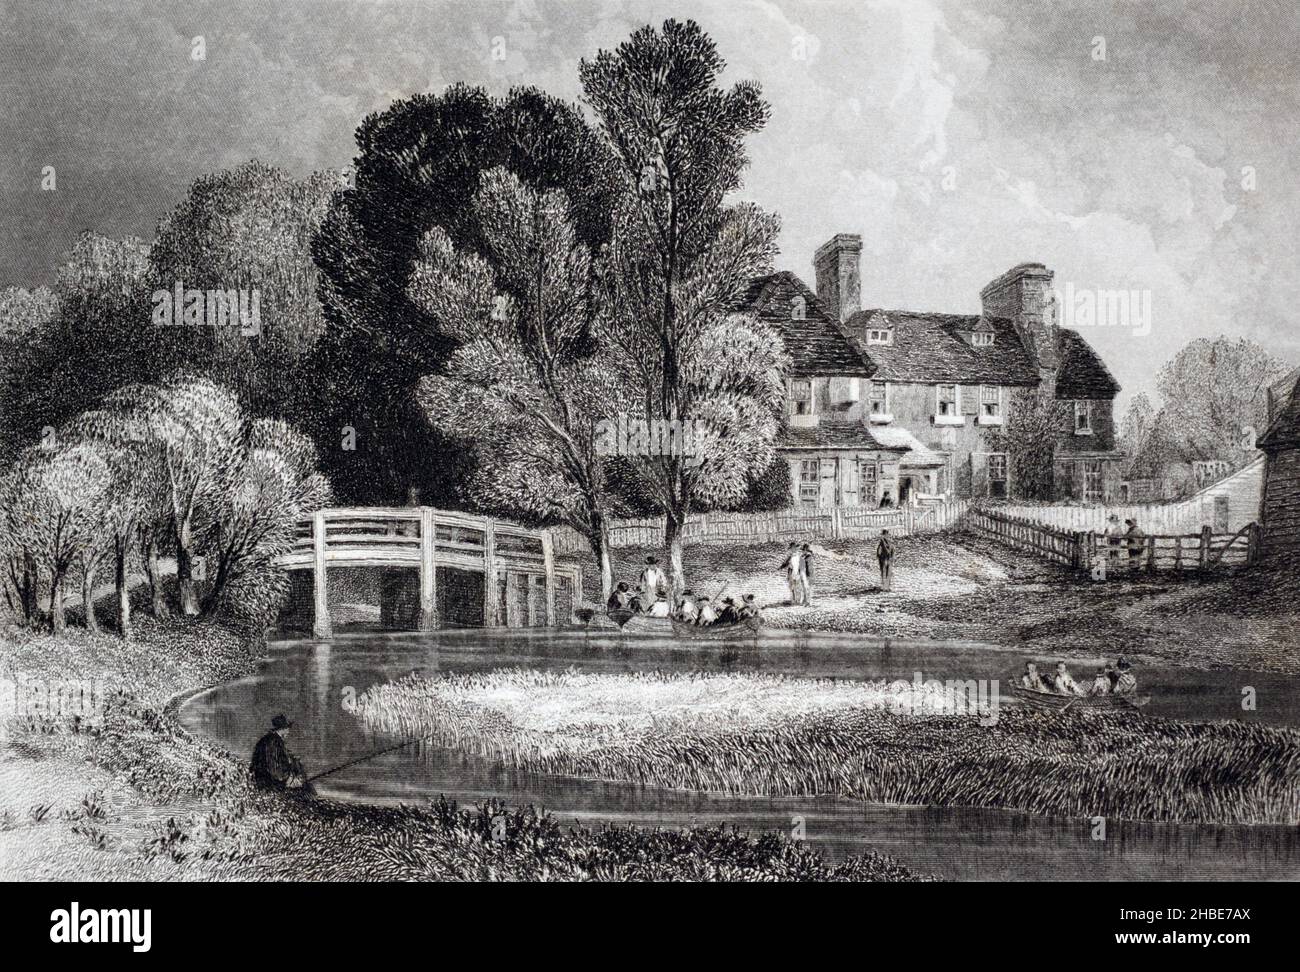 A historical view of Hillyers Bridge and Hughs ferry boat, River Lea, Essex, England, UK. Engraved by C. Mottram from a drawing by C. Marshall. C. 1840. Stock Photo